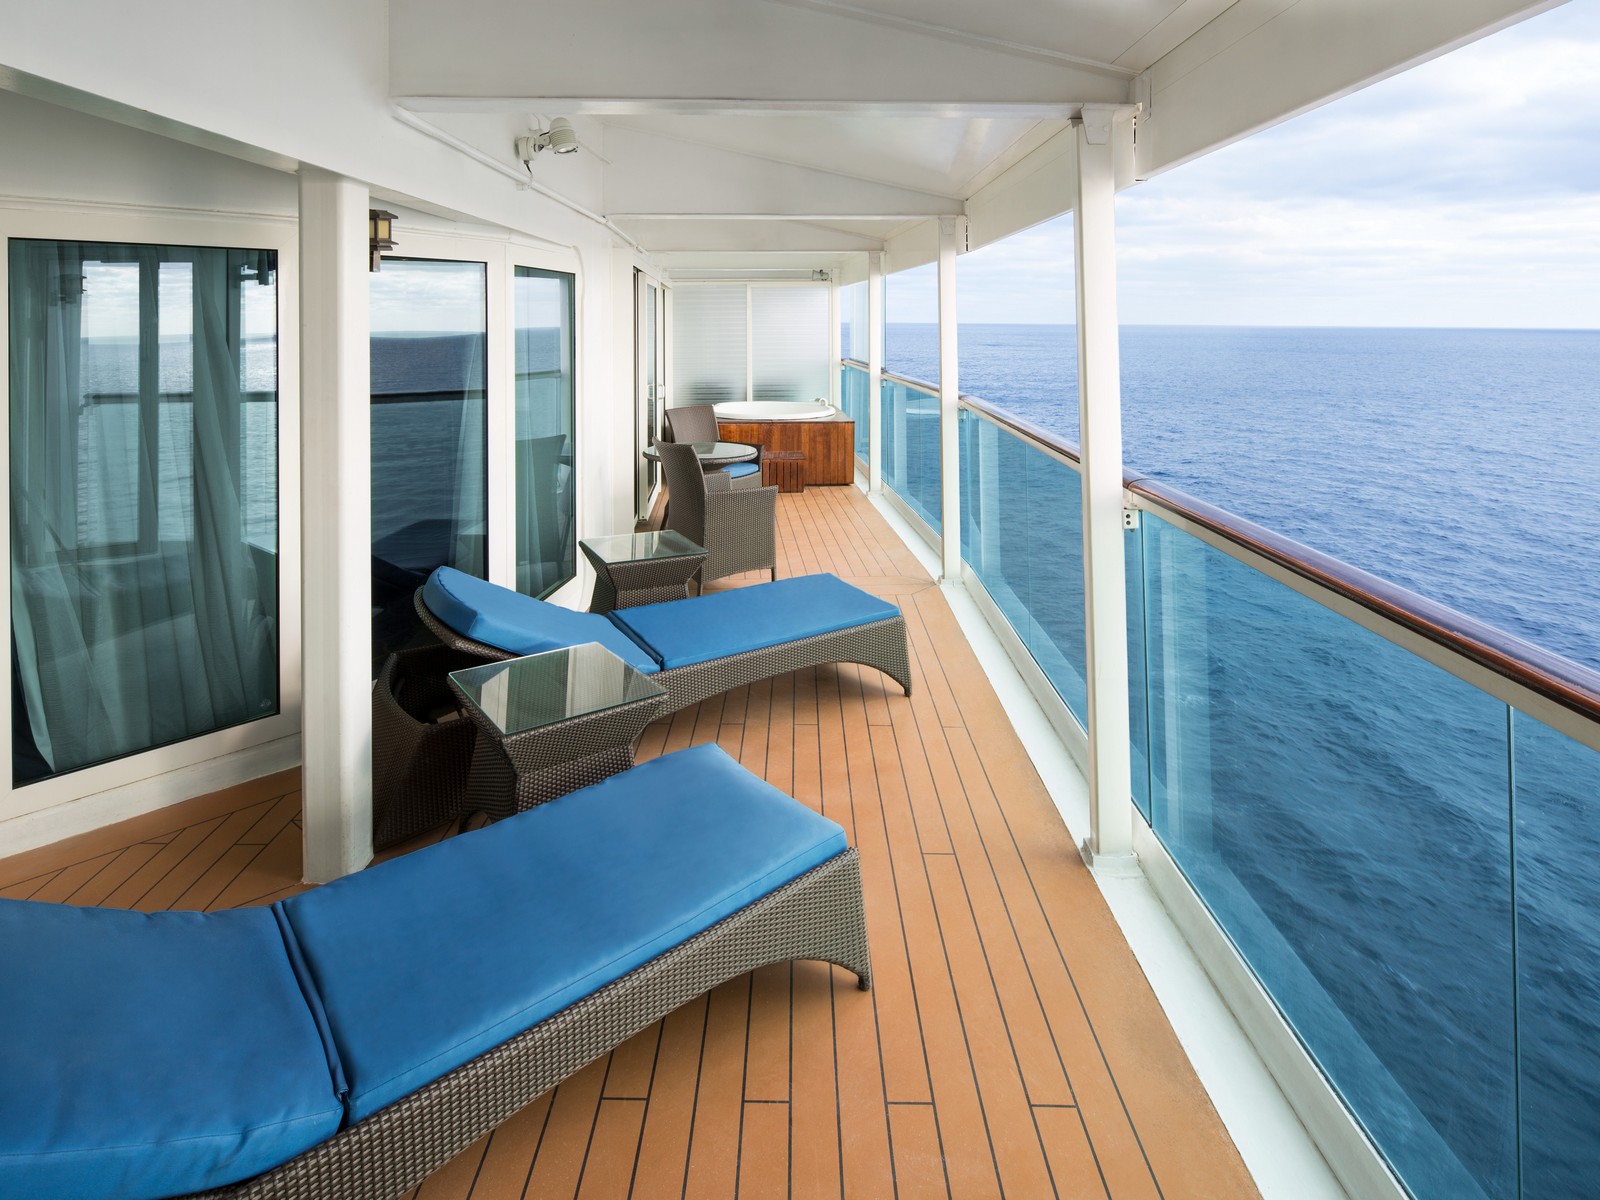 10 Ways to Socially Distance on a Cruise | Cruise.Blog